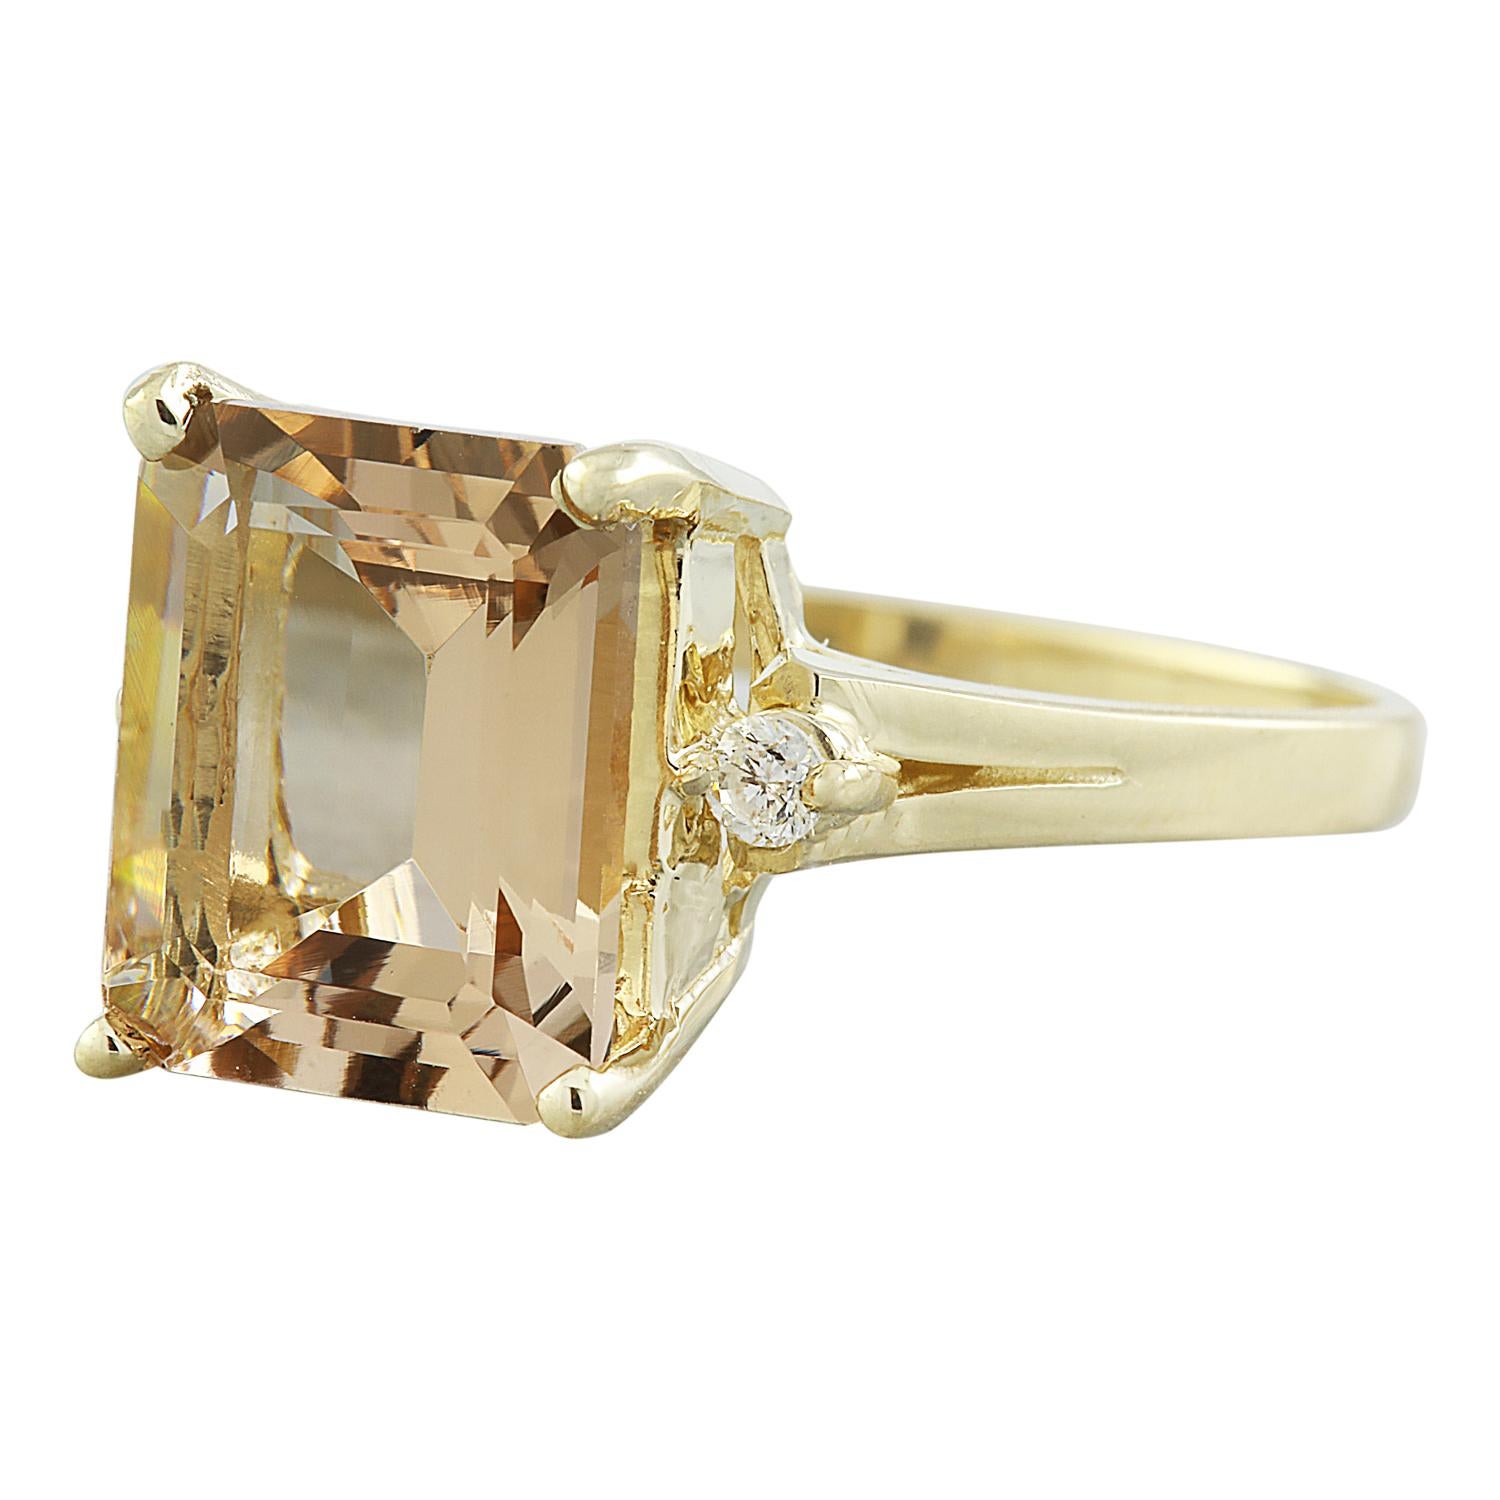 Introducing a breathtaking masterpiece that exudes timeless elegance and sophistication - the 2.26 Carat Natural Morganite 14 Karat Solid Yellow Gold Diamond Ring. Stamped with 14K, this ring embodies the epitome of luxury and refinement.

Crafted